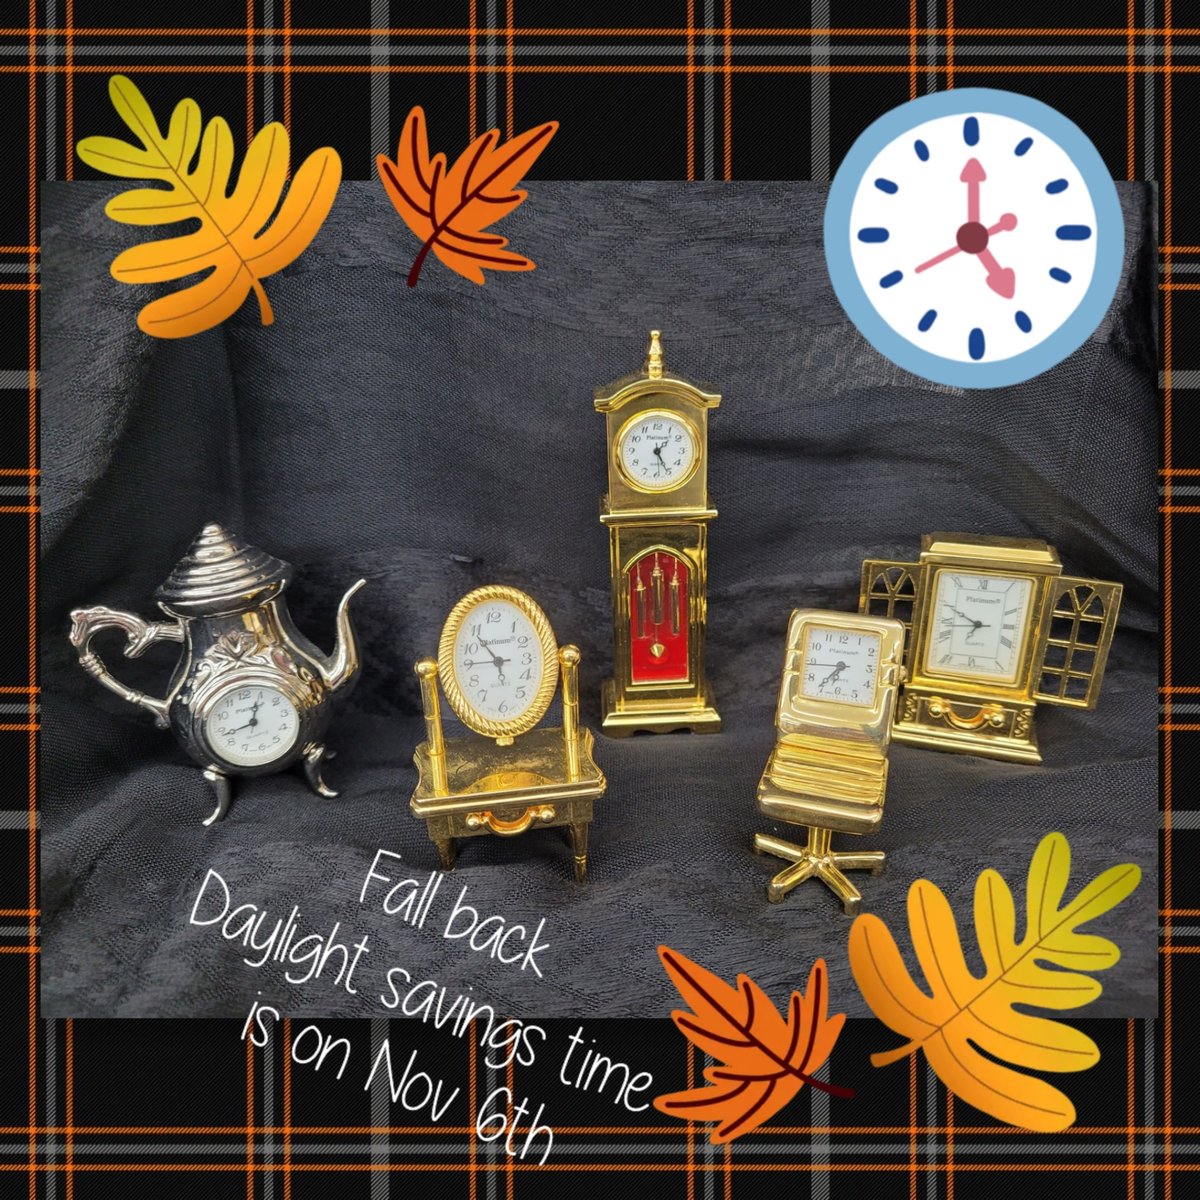 It's time to fall back an hour. Don't forget to change your clocks tonight. #timechange #fallback #miniatureclocks